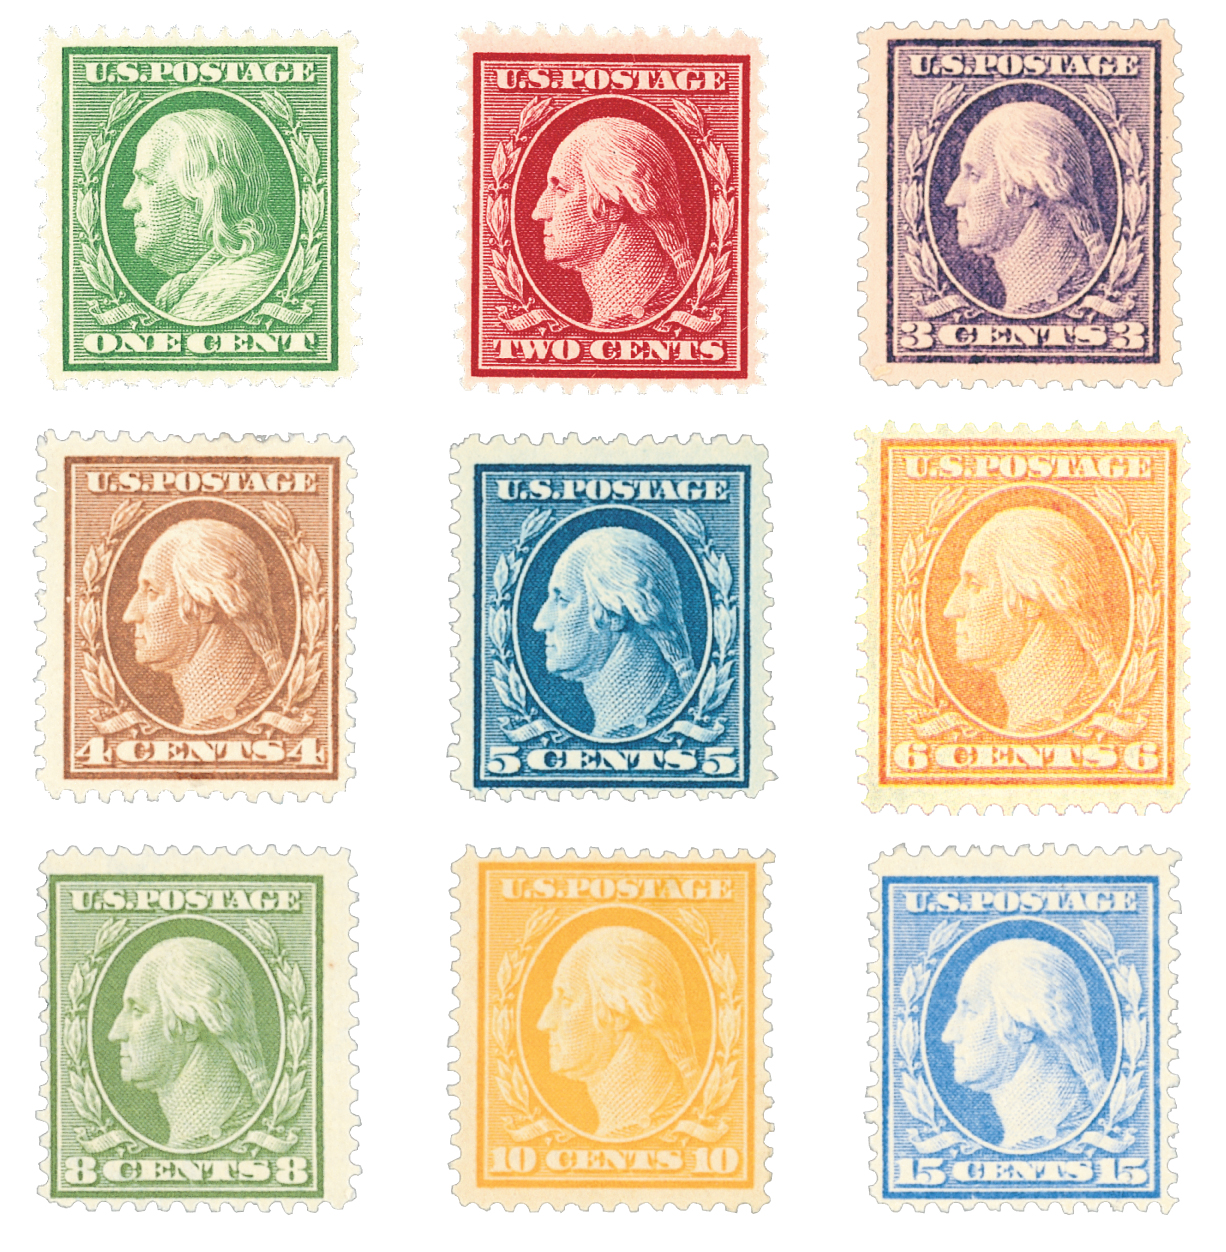 U.S. #374-82 – Many of the covers from Ovington’s flight were Washington-Franklins